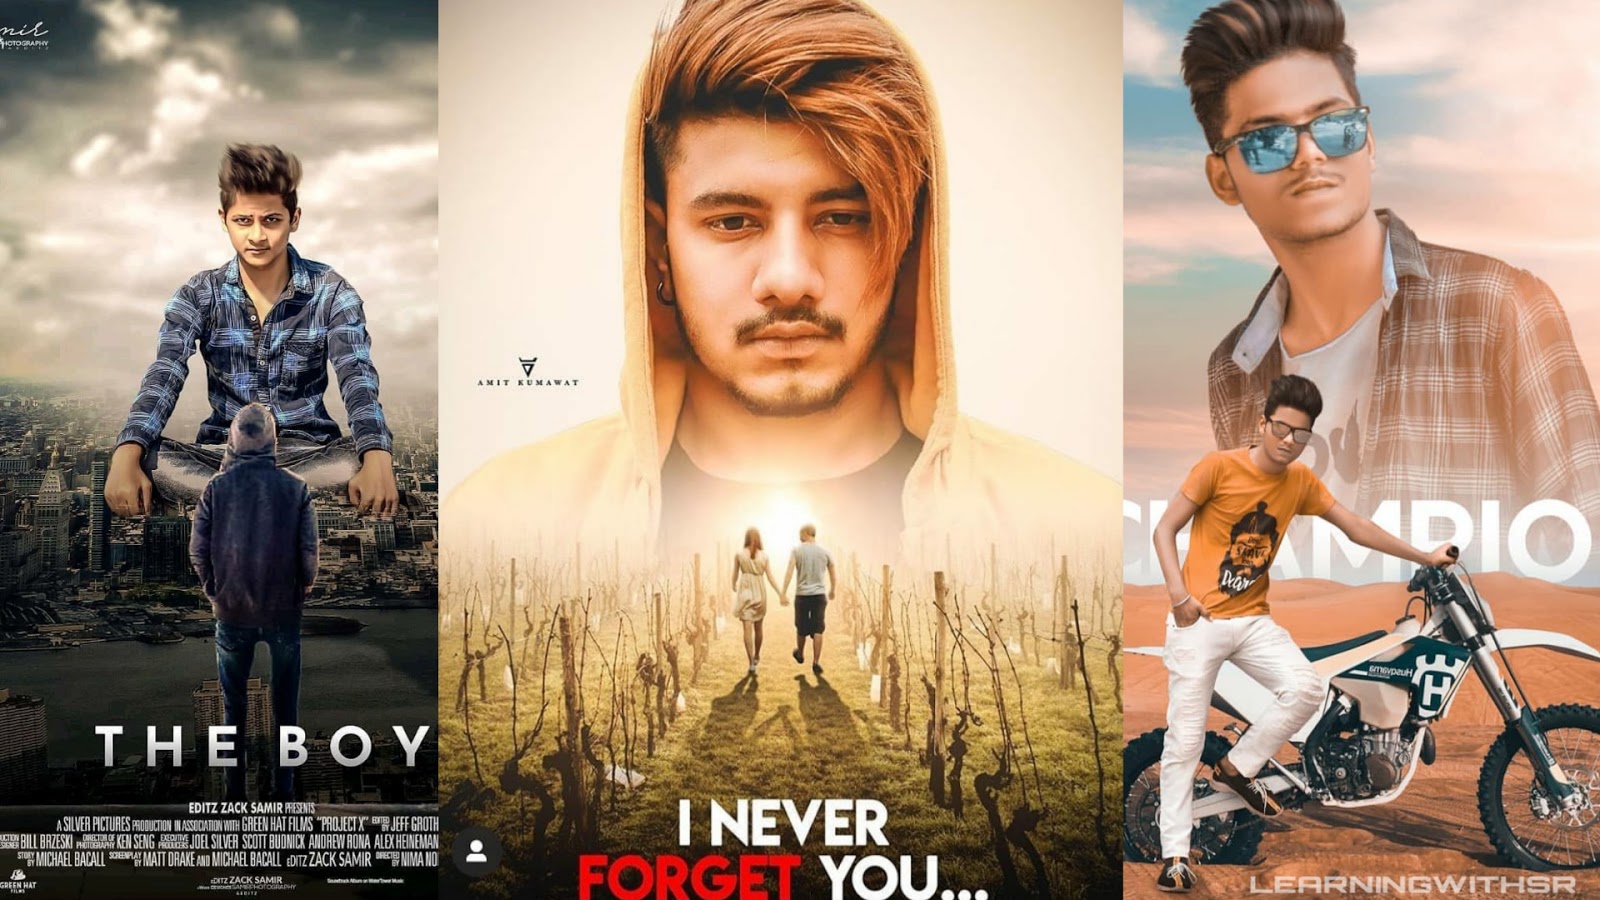 Movie poster photo editing, Picsart movie poster editing background 2019 -  LEARNINGWITHSR